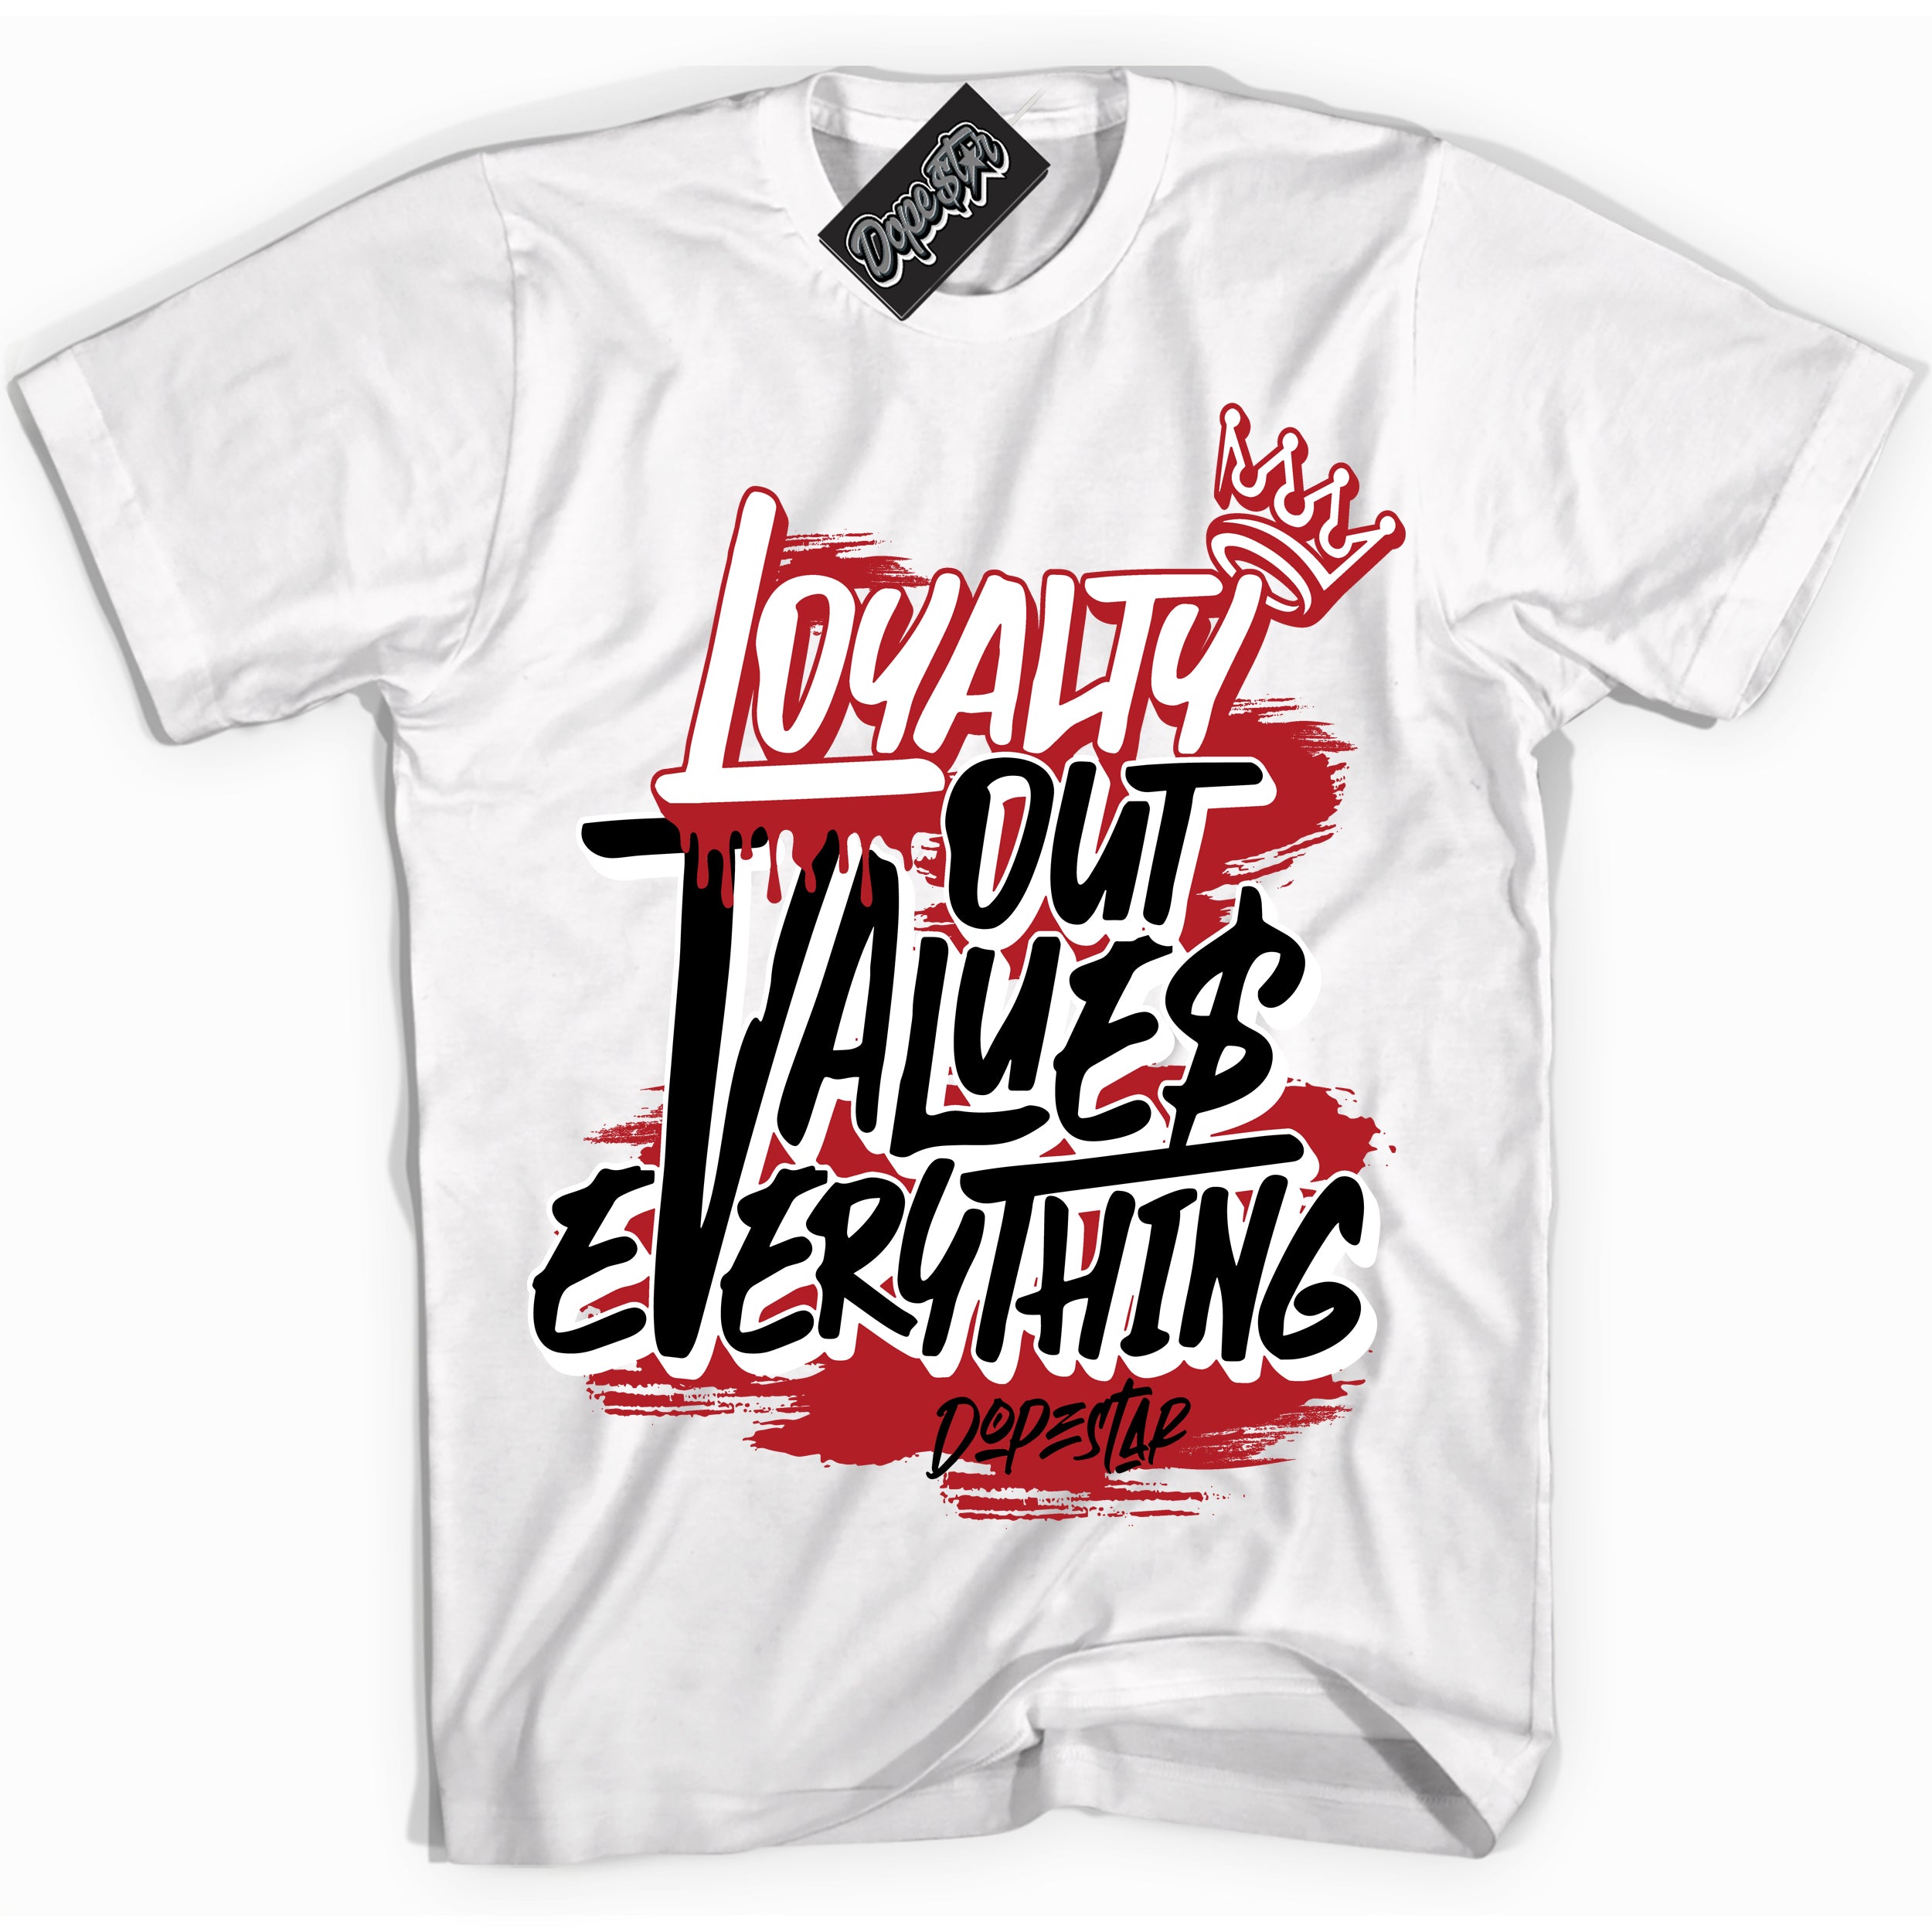 Cool White Shirt with “ Loyalty Out Values Everything” design that perfectly matches Red Swoosh Panda  Sneakers.